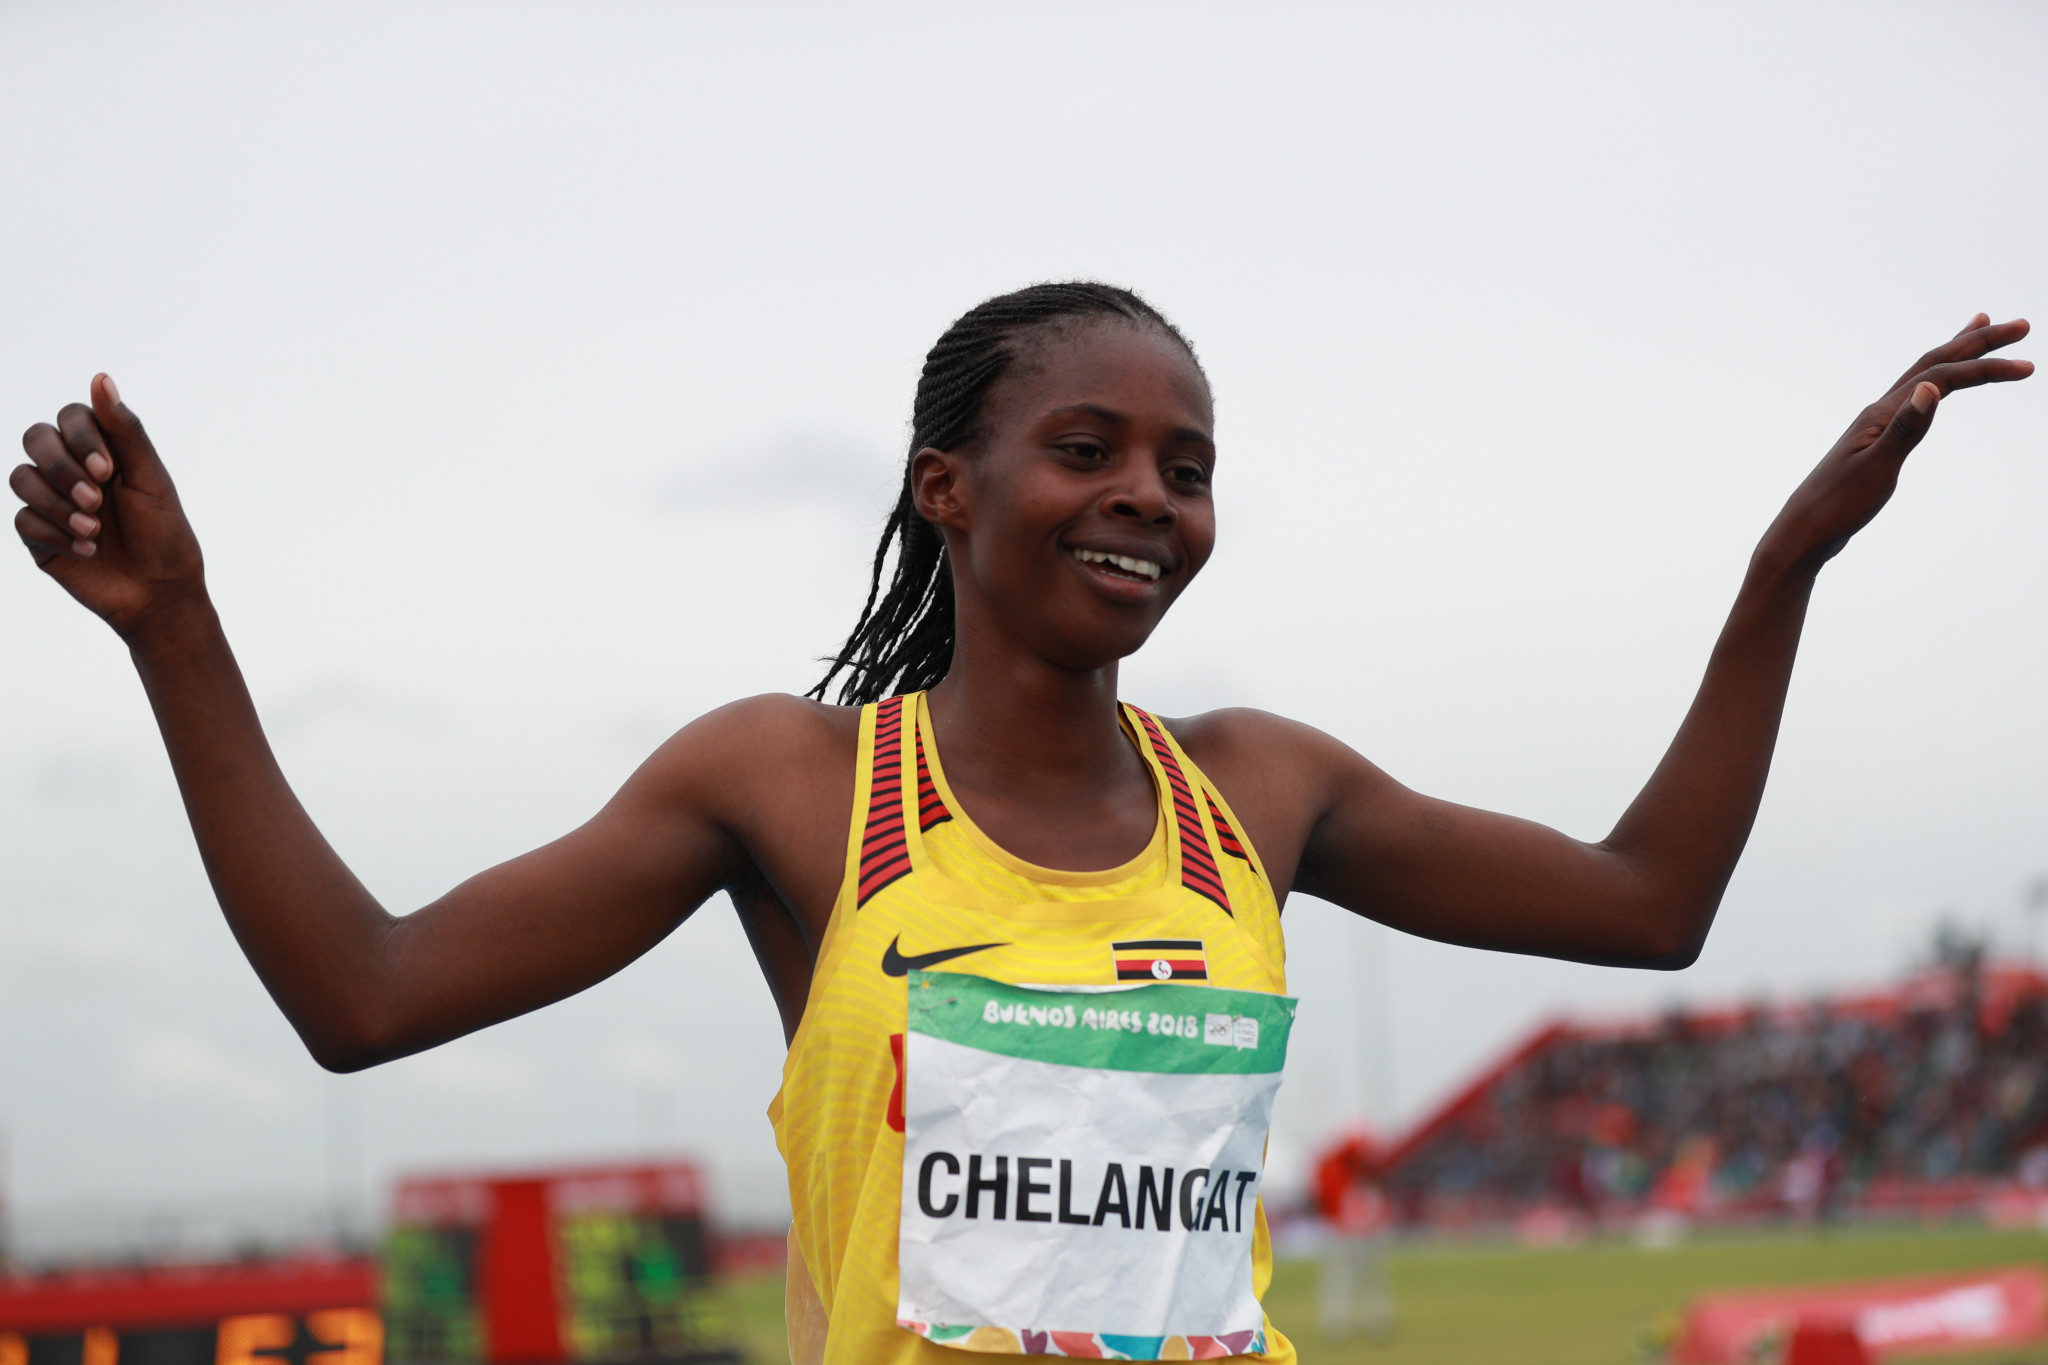 Uganda;s Sarah Chelangat is one of the favourites in the women's World Athletics Cross Country Tour Gold race in Amorebieta ©Getty Images